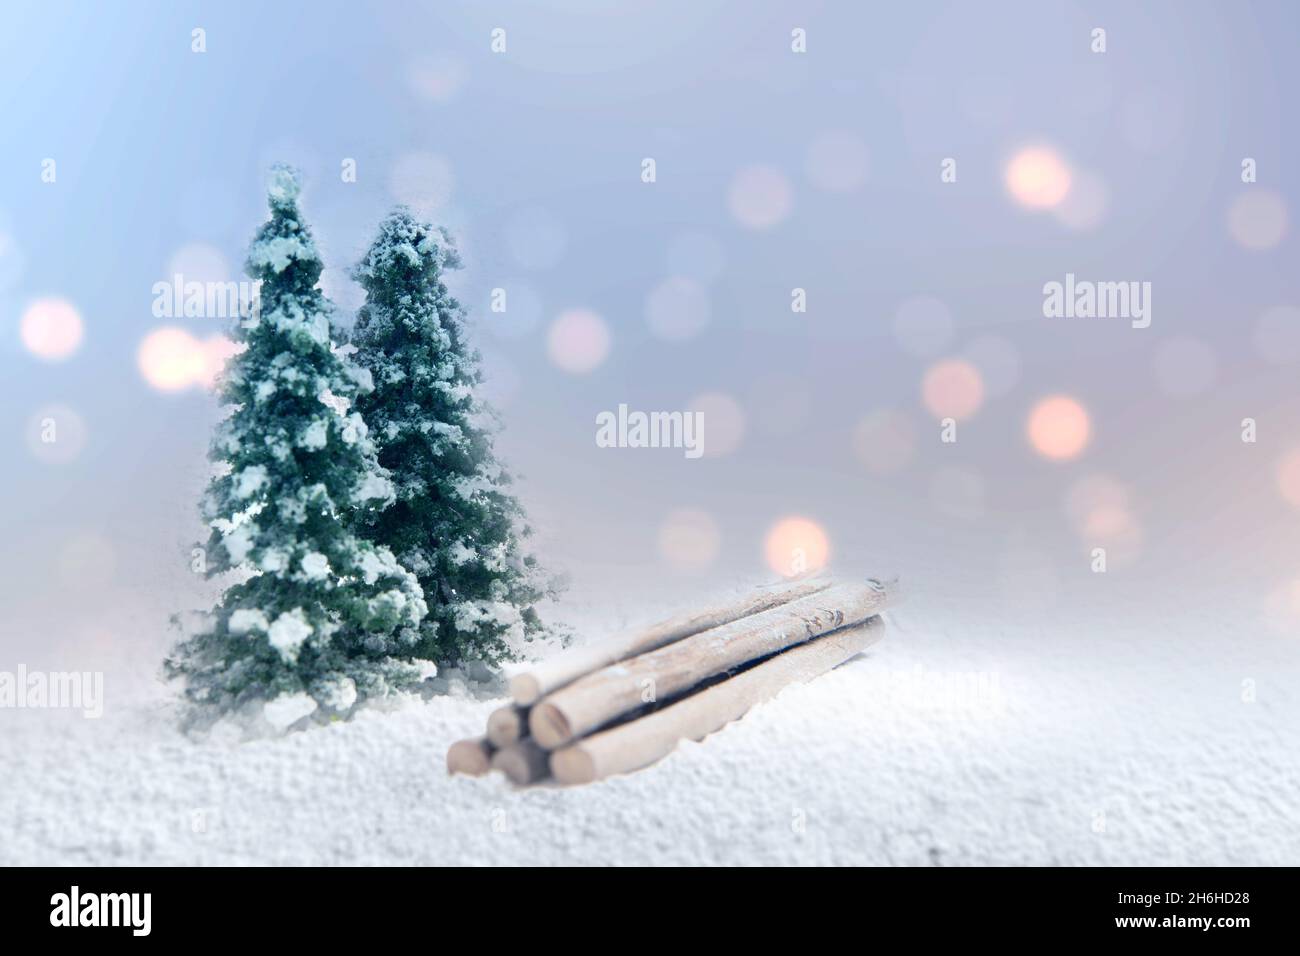 Snowy fir trees on the snowfield Stock Photo